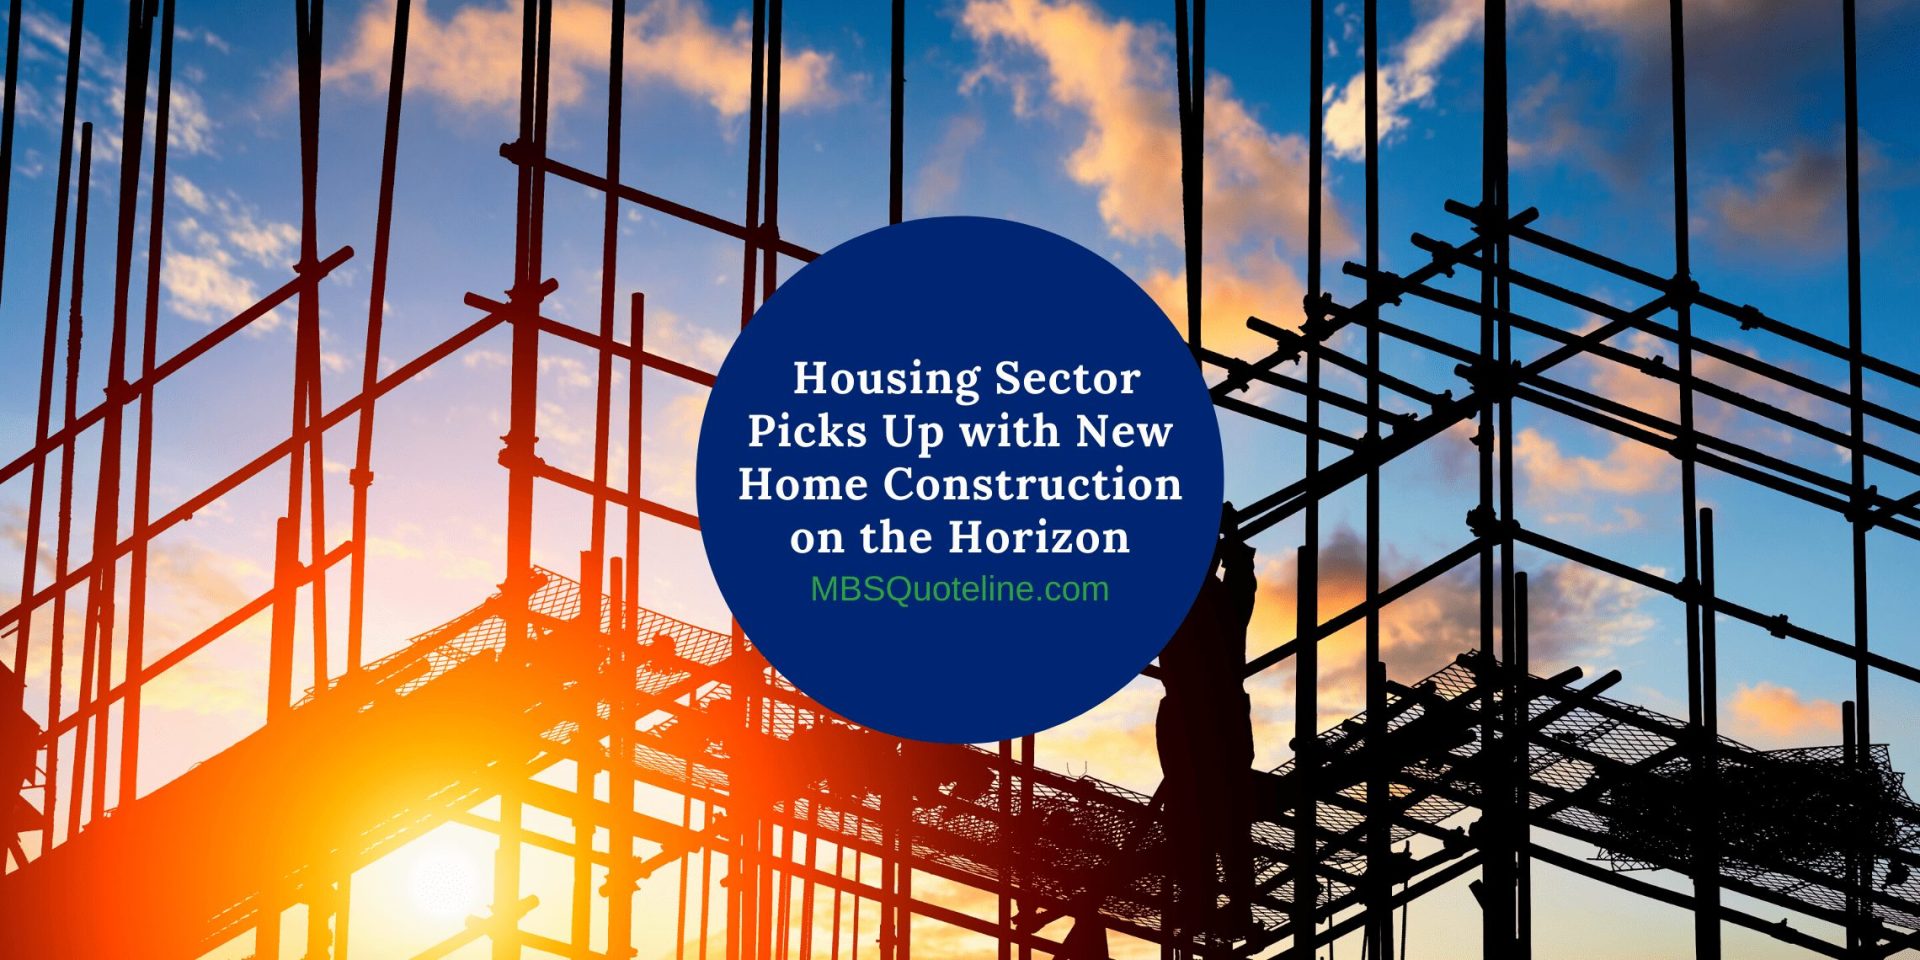 Housing Sector Picks Up with New Home Construction on the Horizon mortgagetime mbsquoteline featured